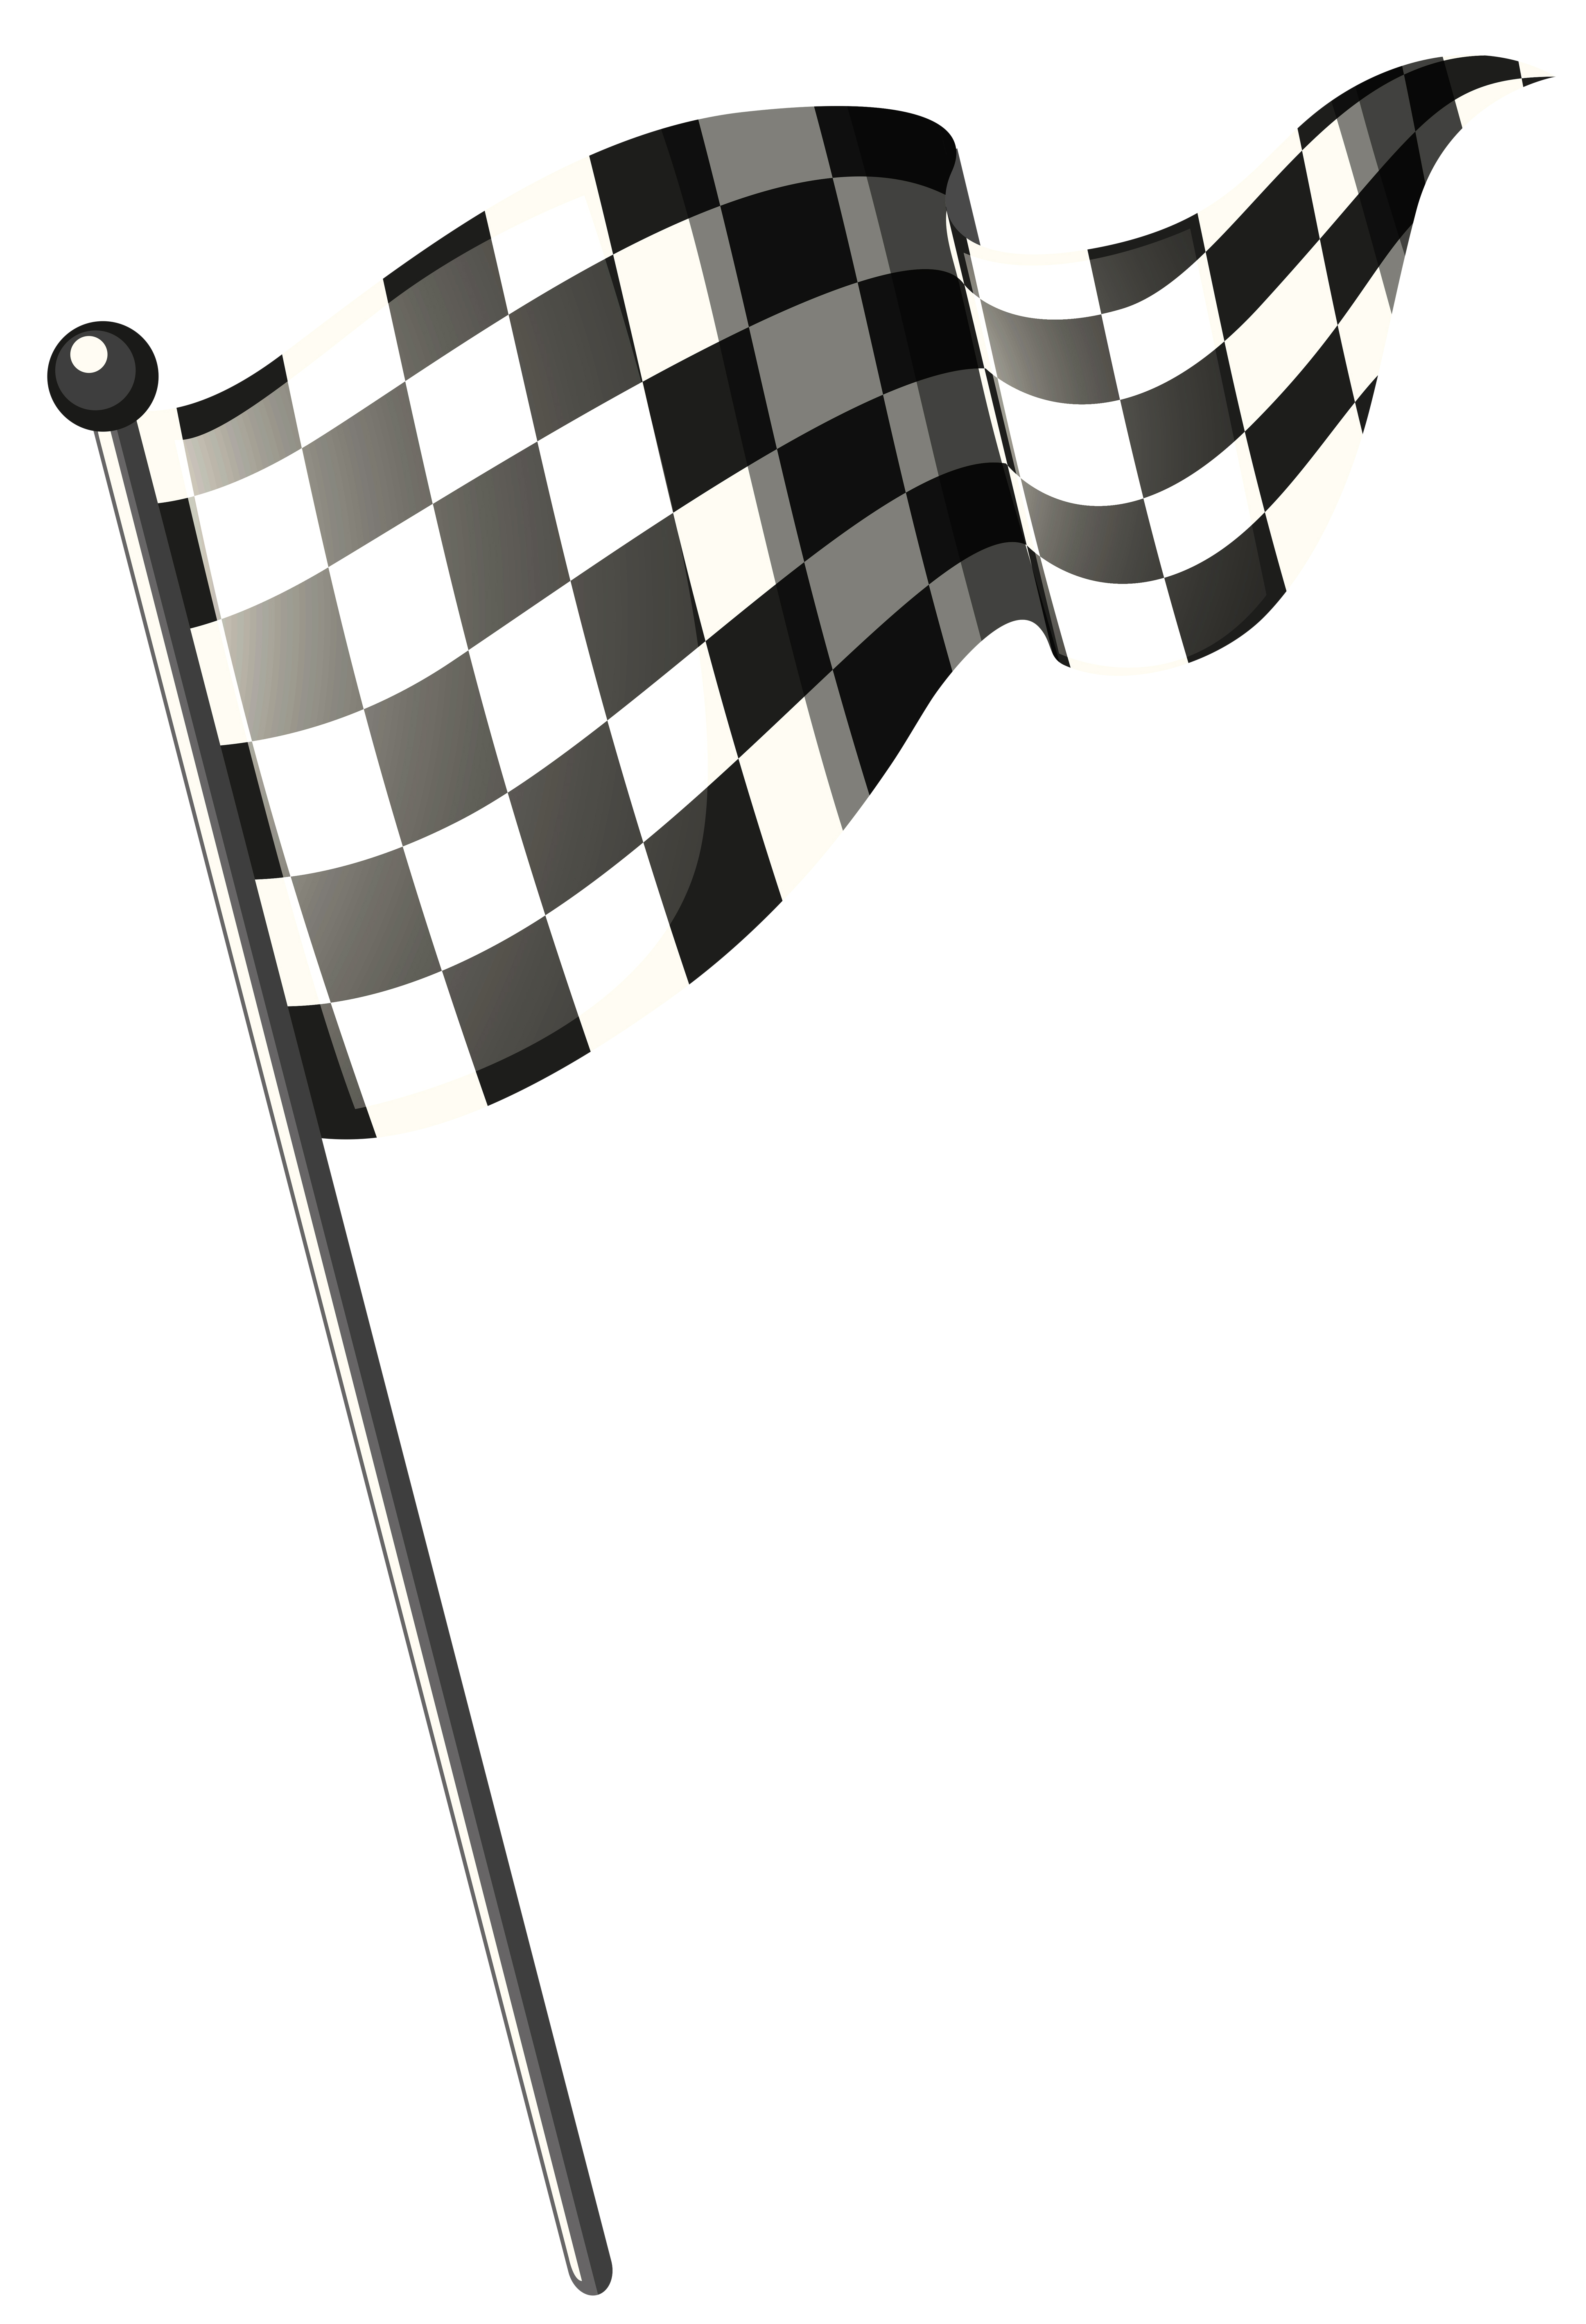 Download Racing flag on black pole - Download Free Vectors, Clipart ...